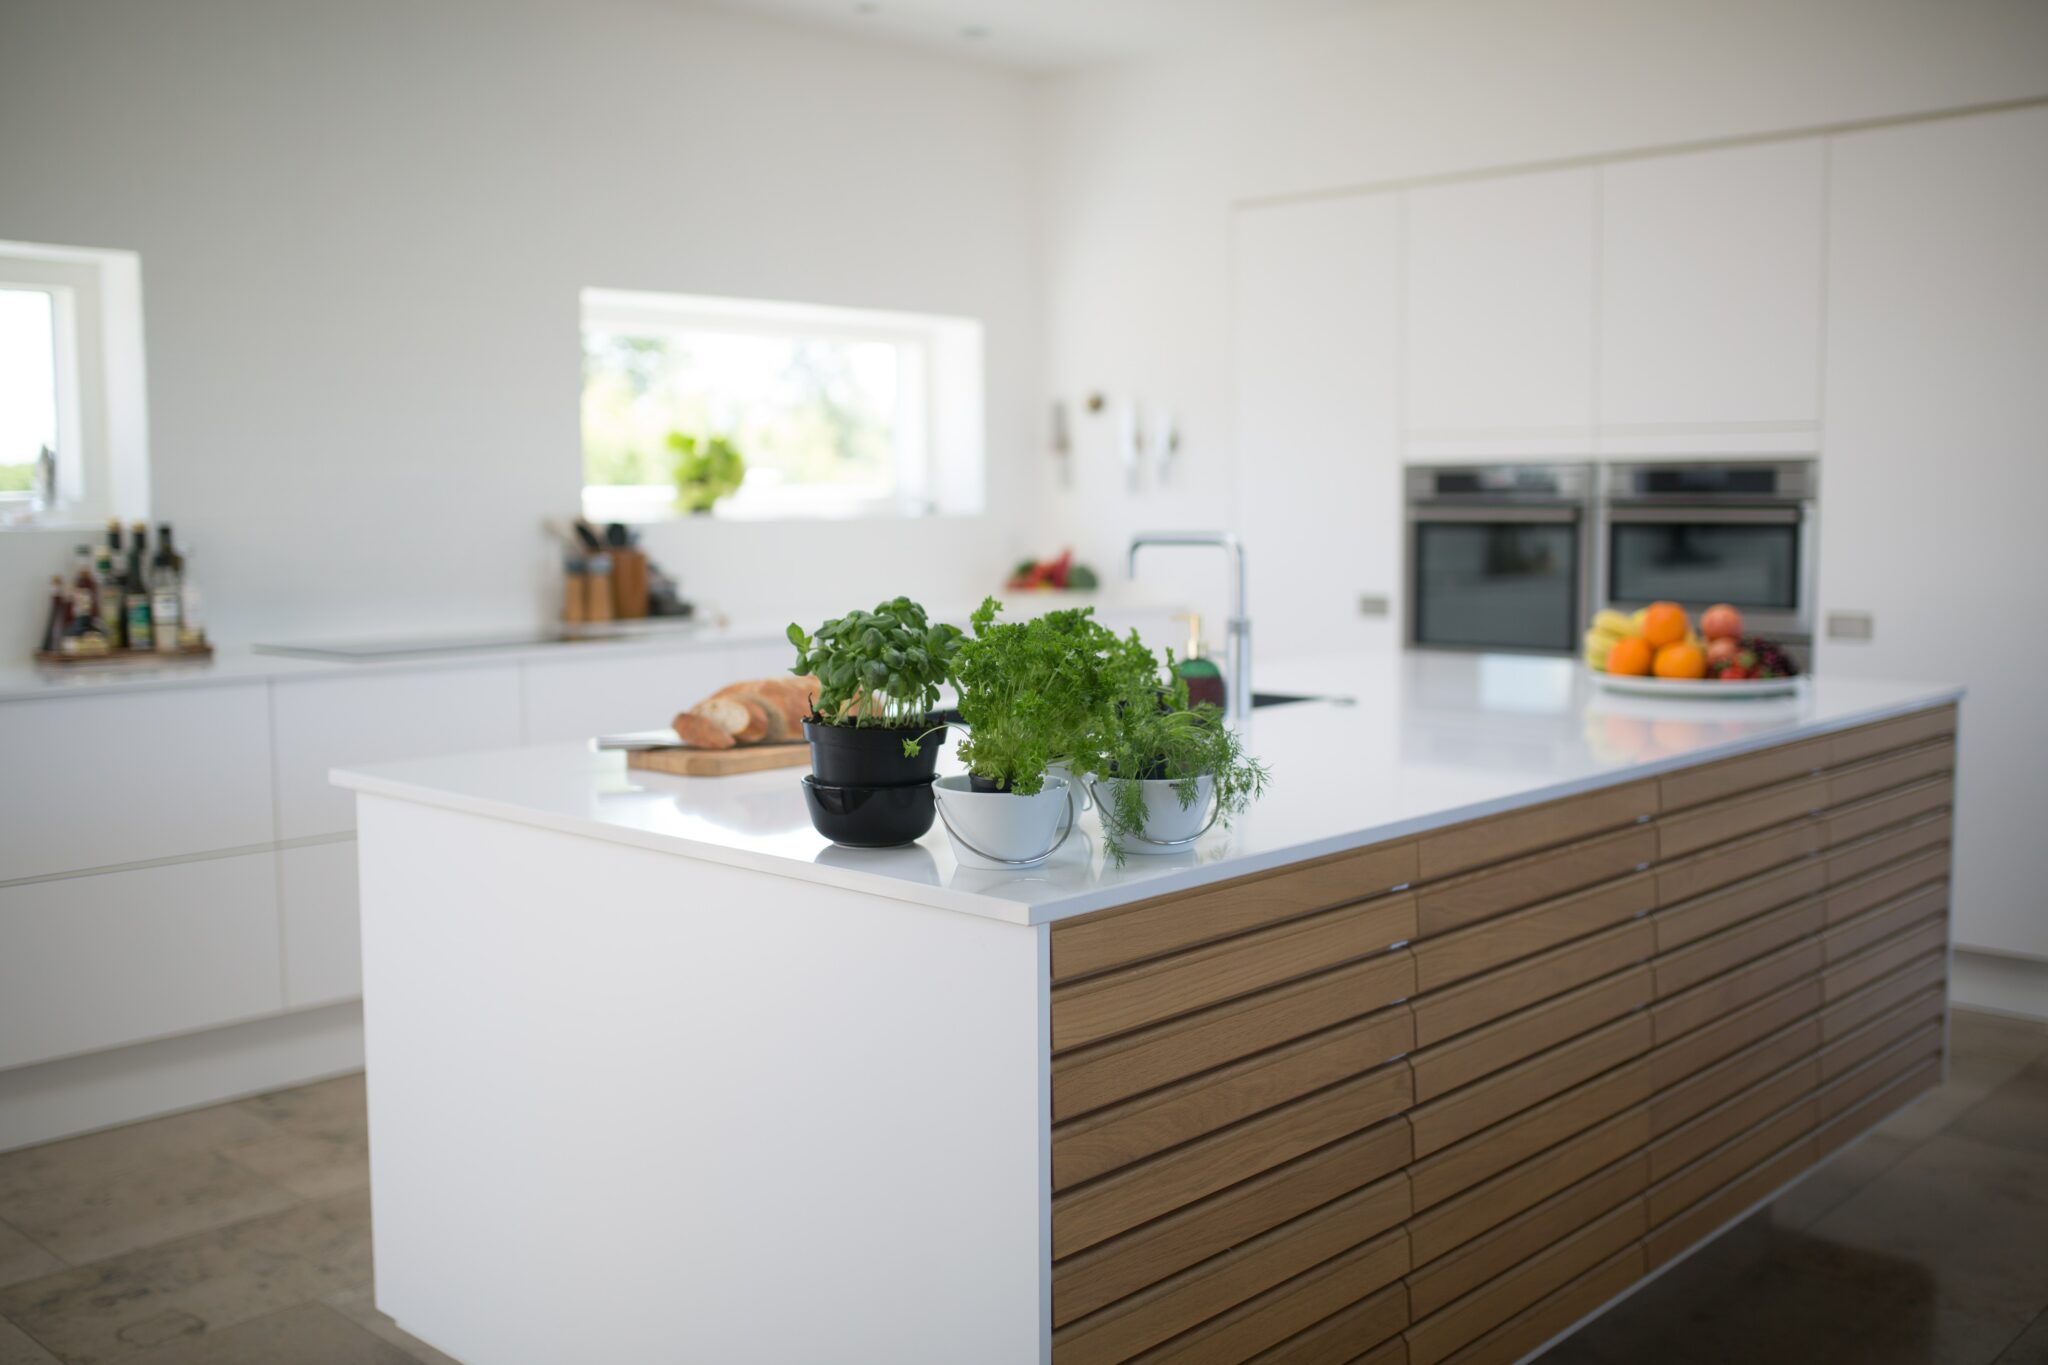 Benefits of a Kitchen Island with a Breakfast Bar